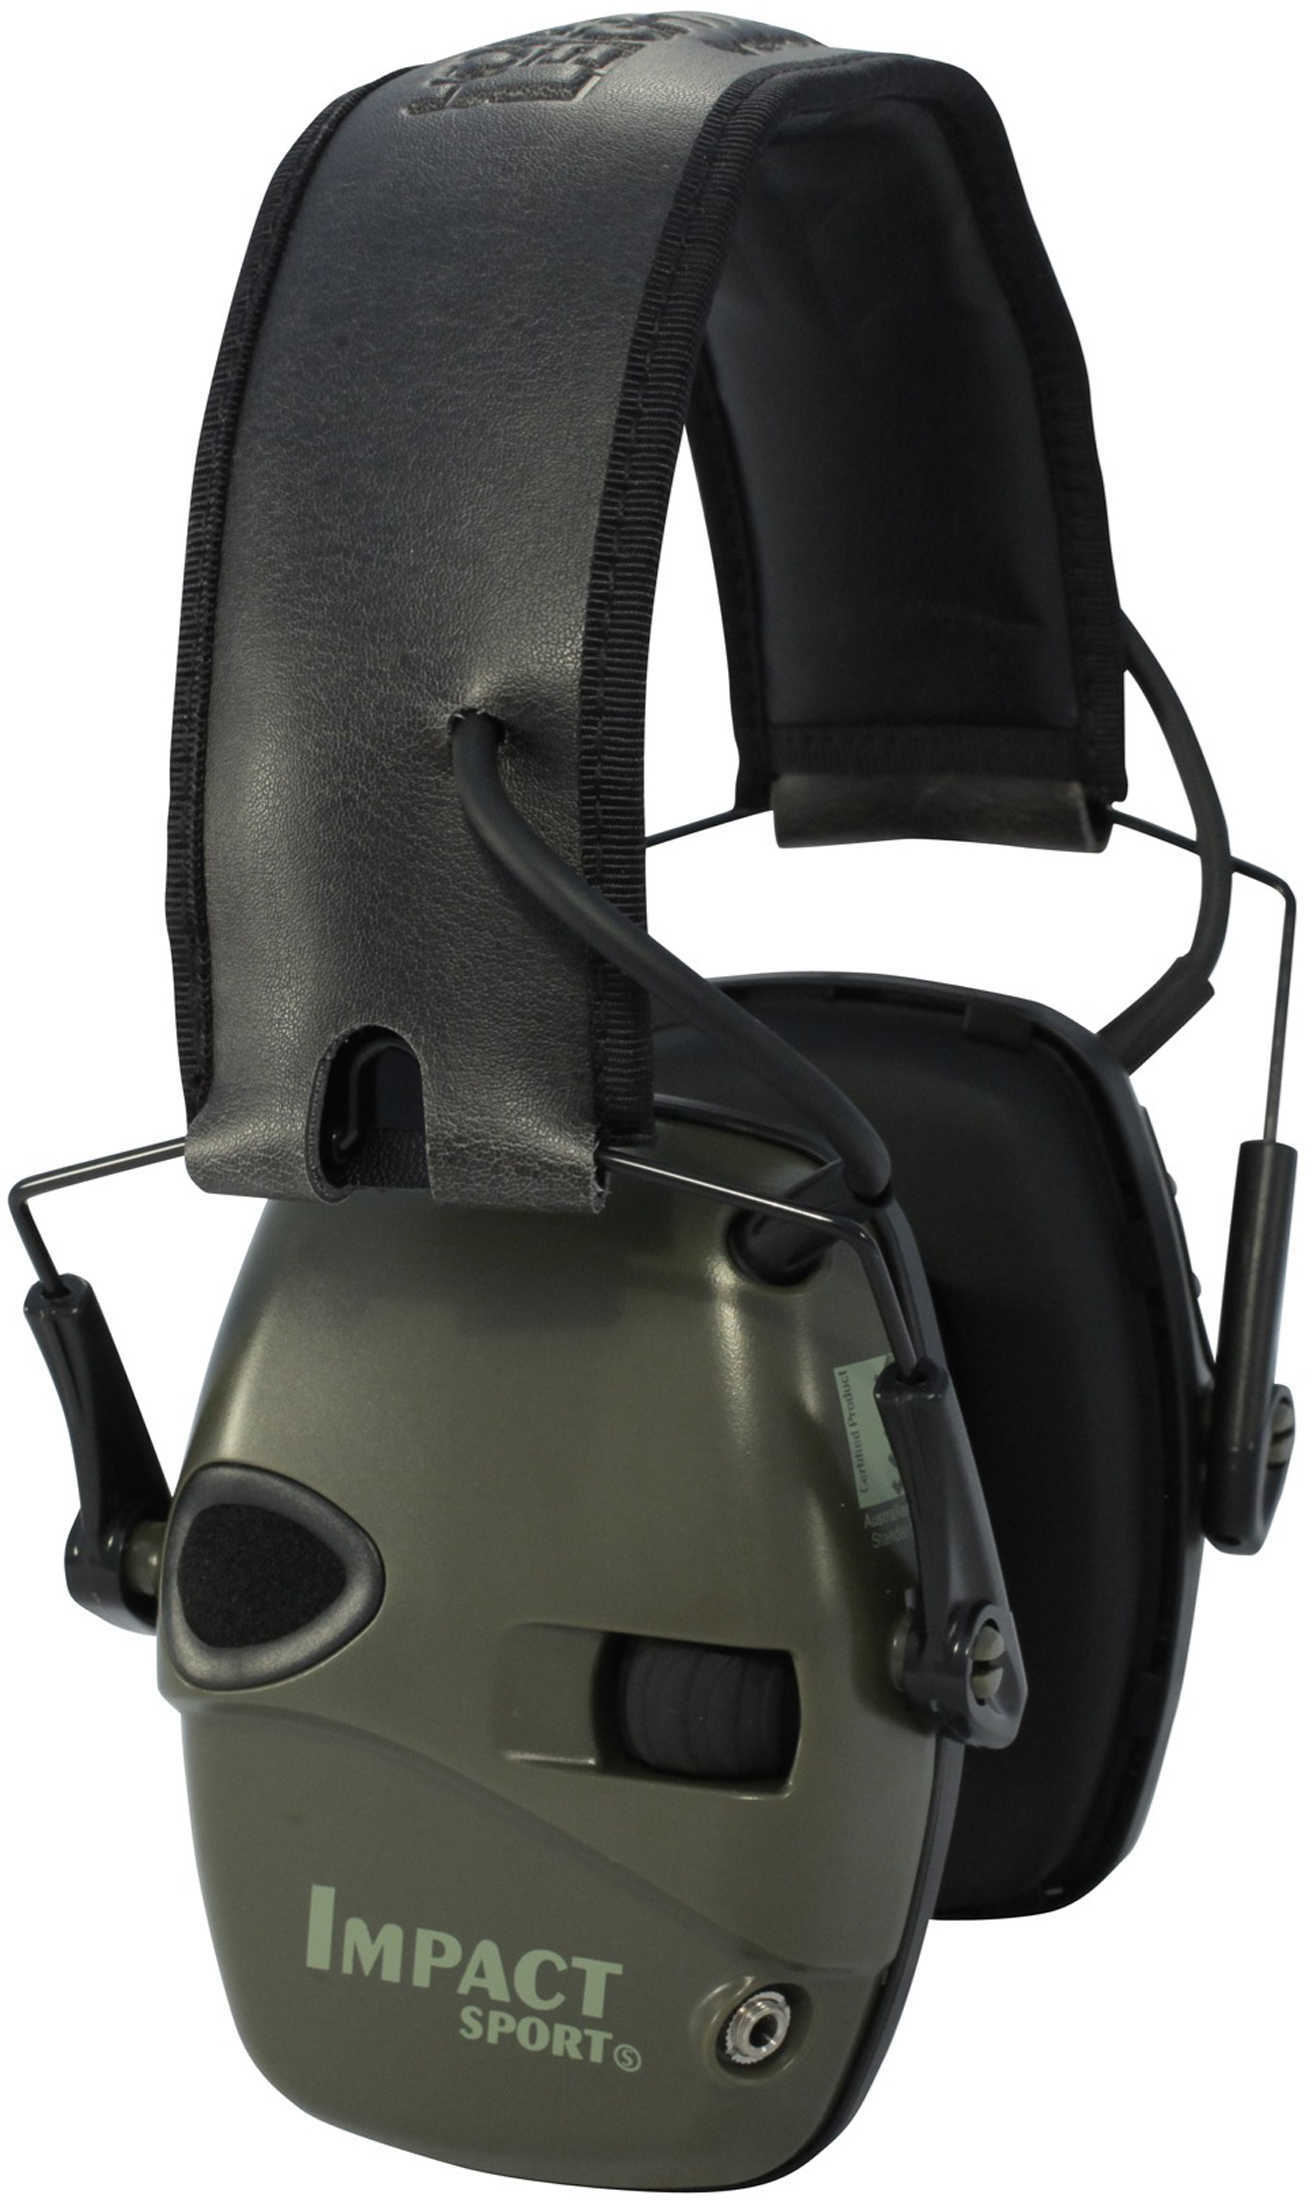 Howard LEIGHT Impact Electronic Ear Muff NRR22